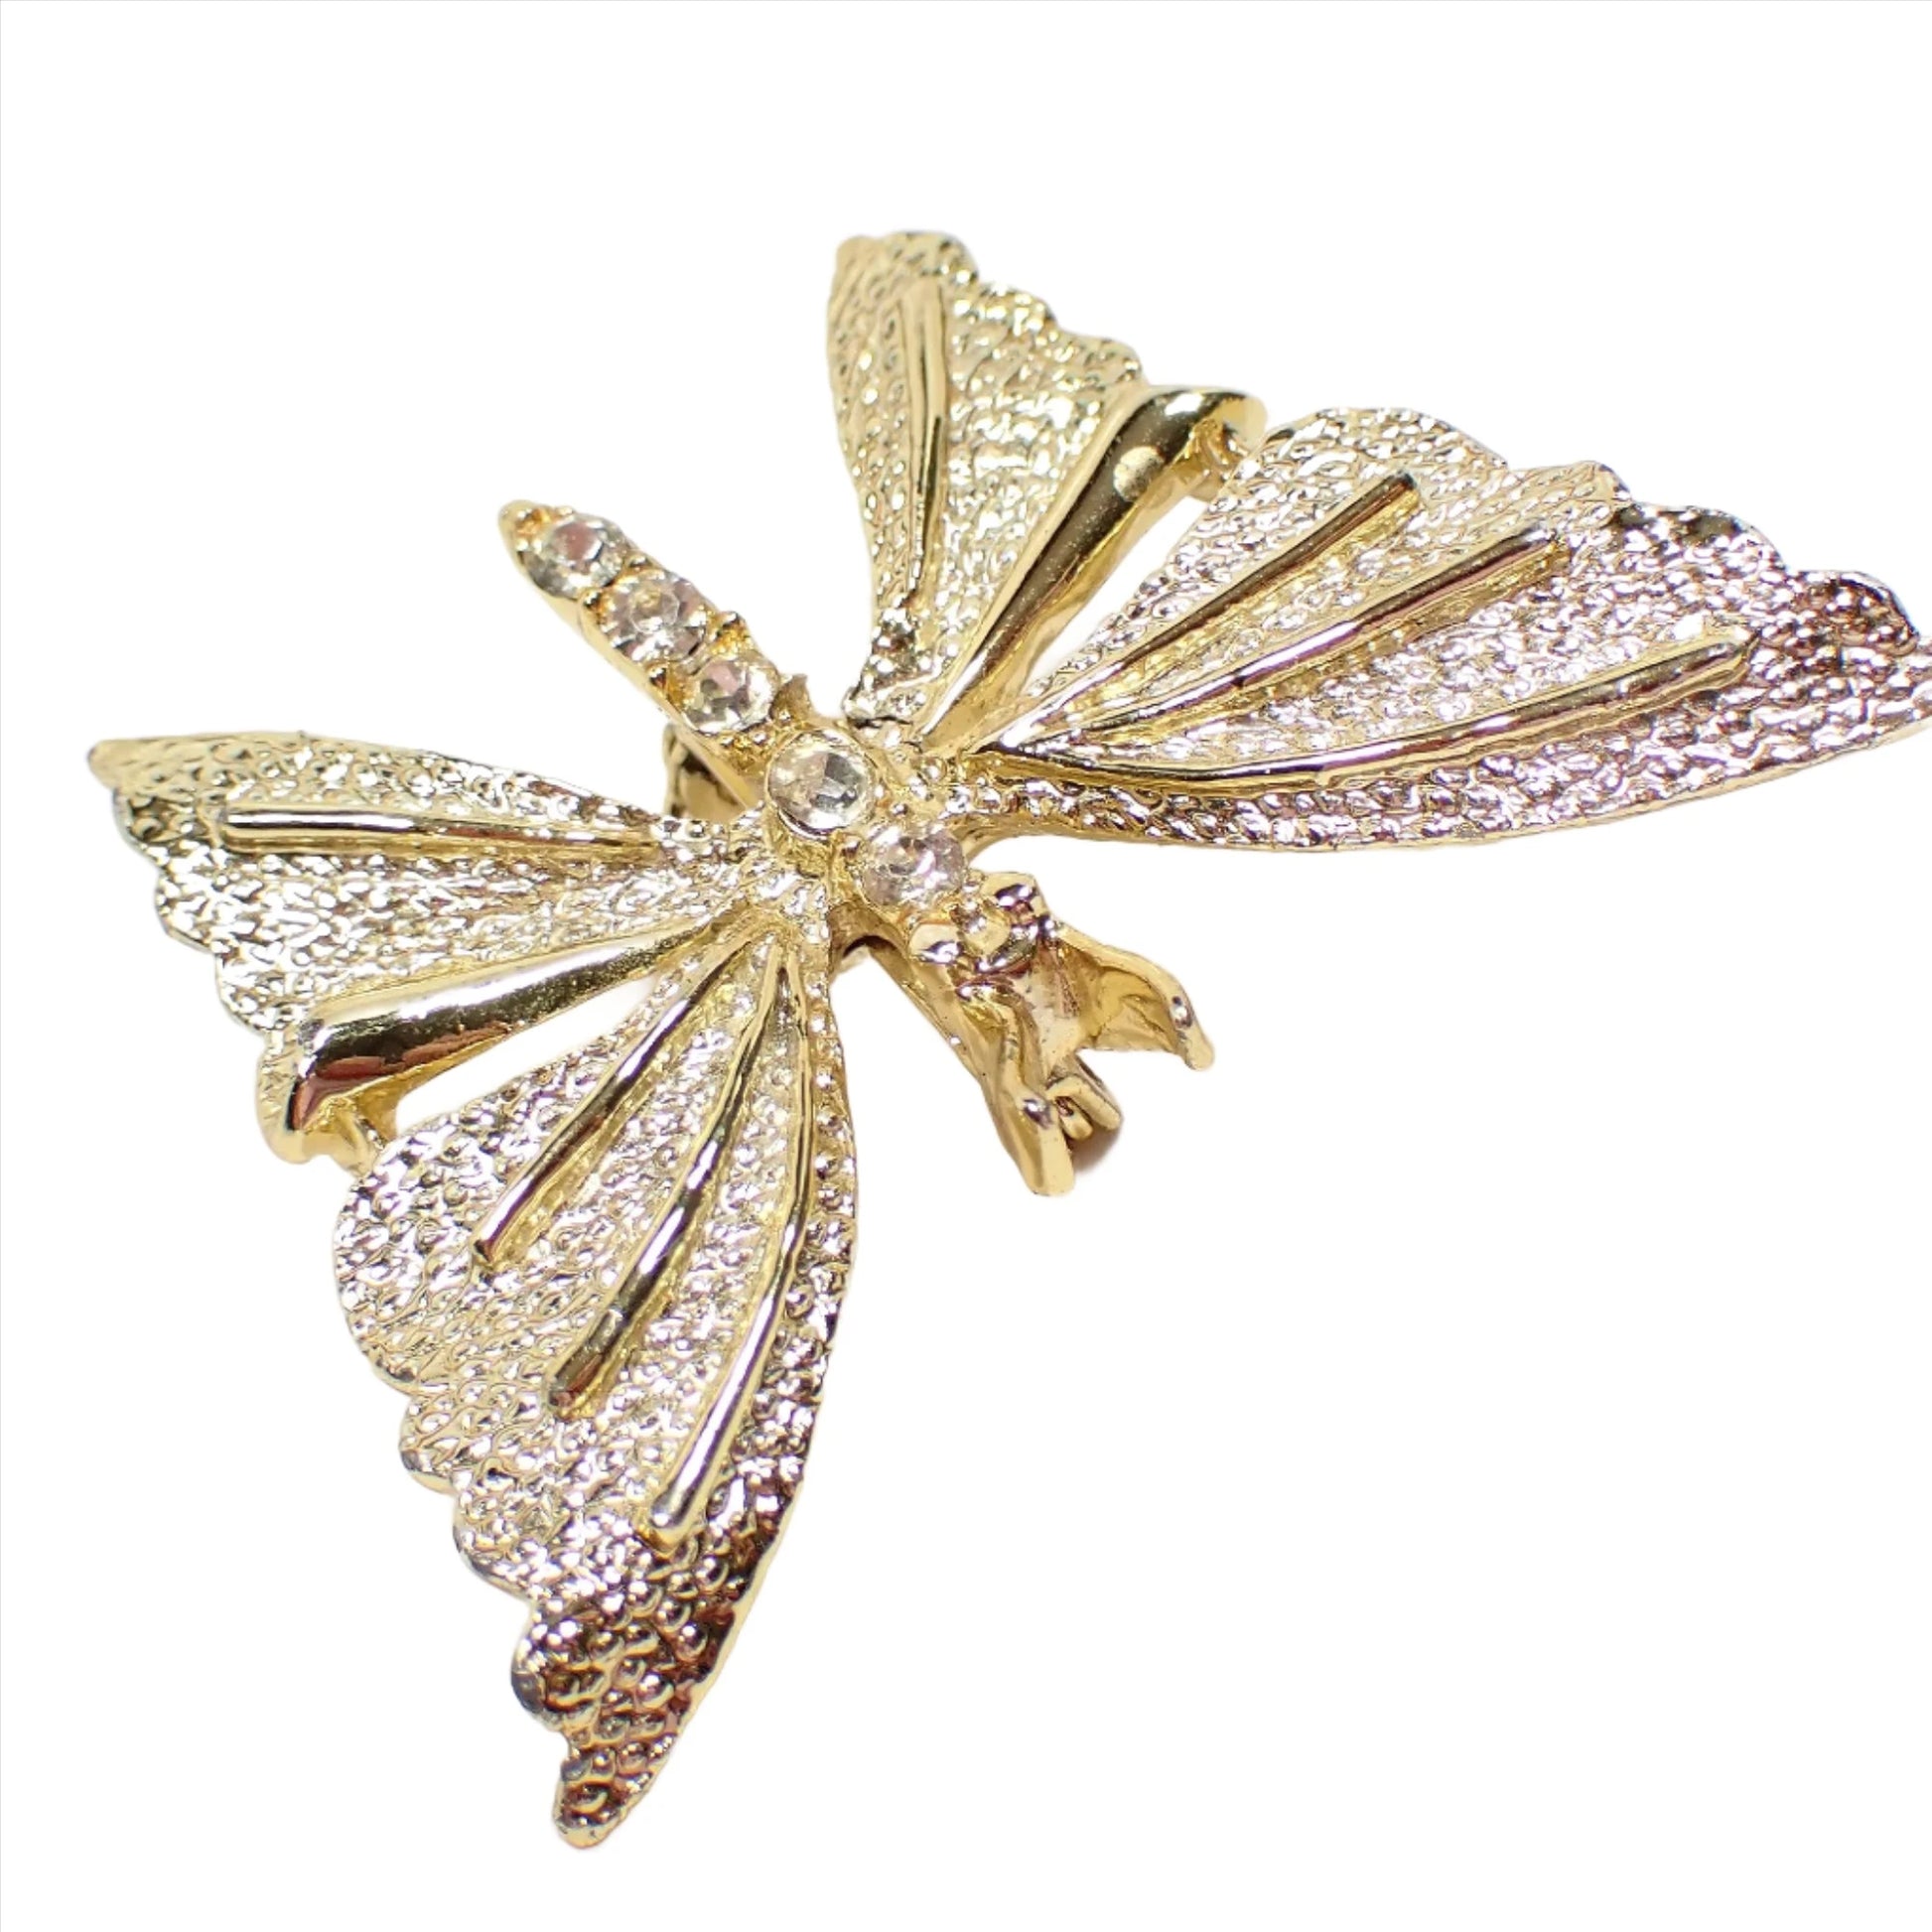 Angled view of the retro vintage Gerry's brooch pin. It's shaped like a butterfly with clear rhinestones down the body of the butterfly. The metal is gold tone in color and the wings have a bumpy textured pattern.